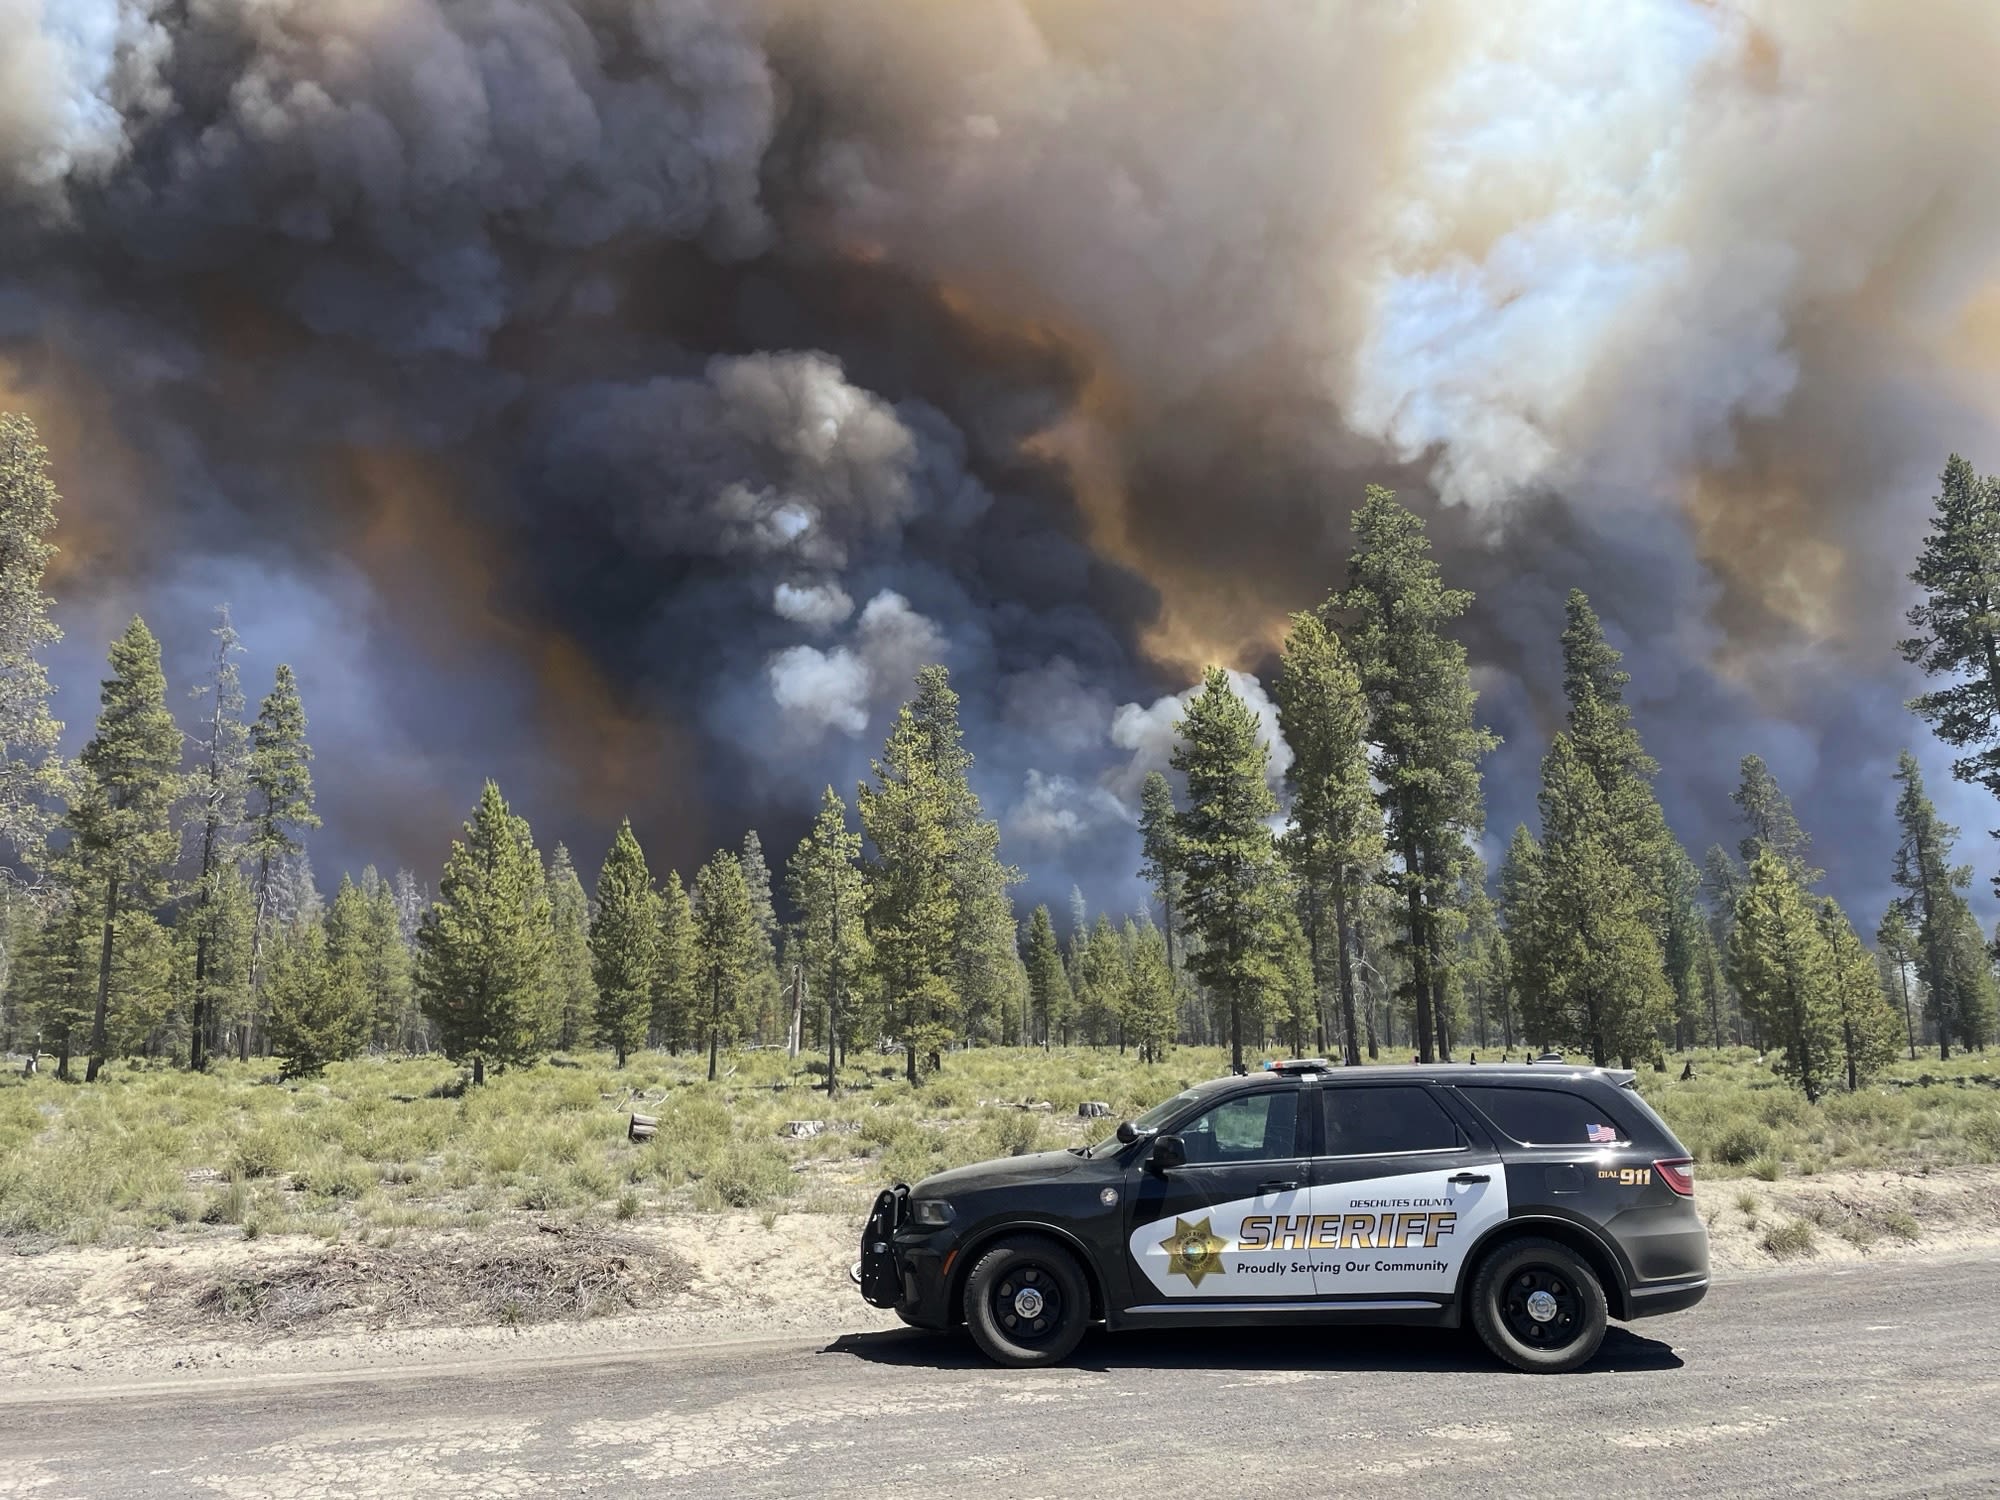 Wind-driven wildfire spreads near popular central Oregon vacation spot and prompts evacuations - WTOP News